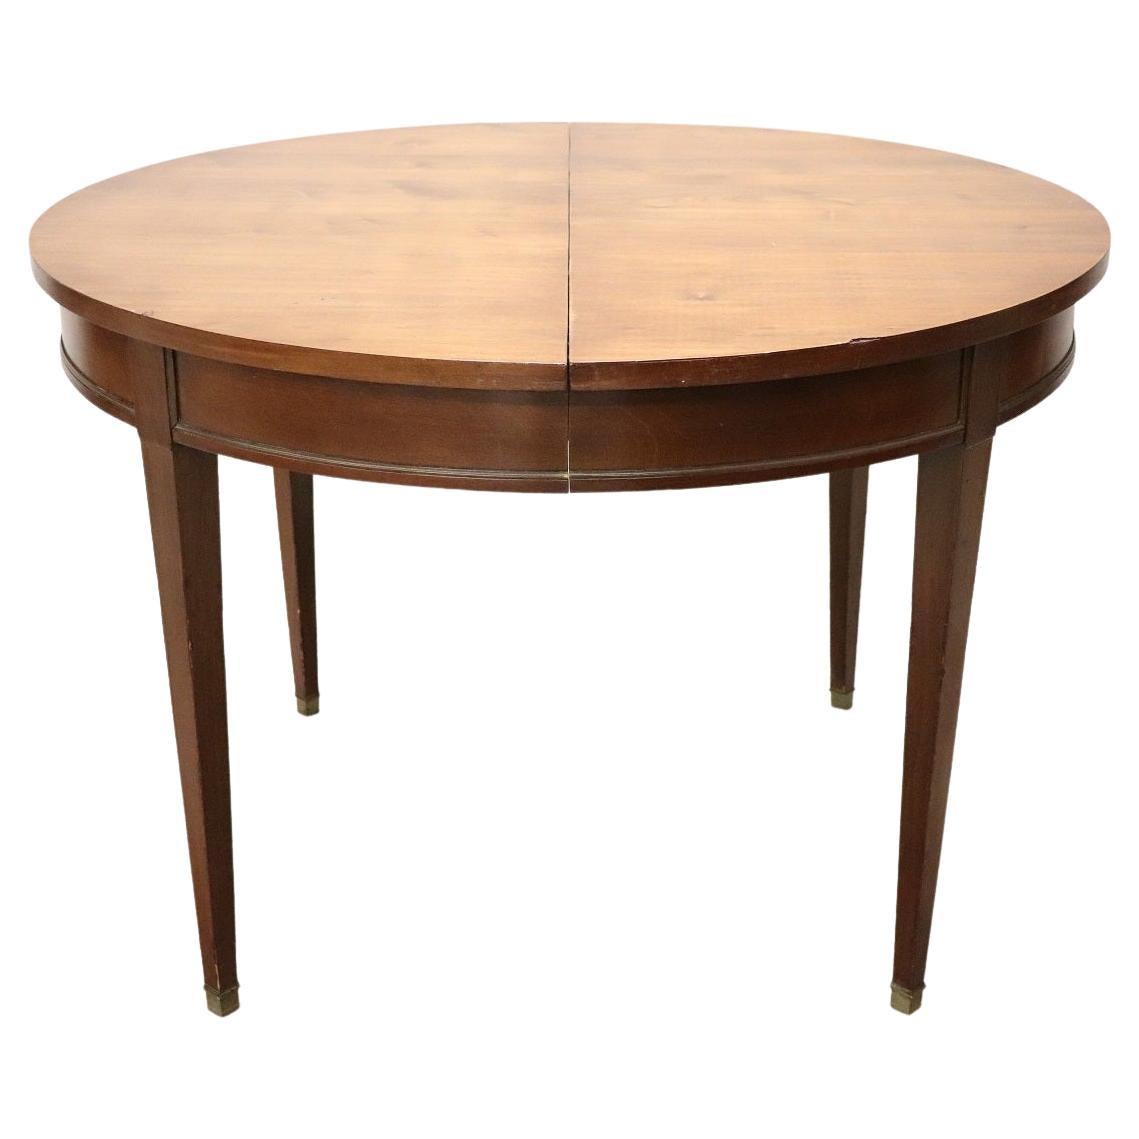 Early 20th Century Italian Louis XVI Style Walnut Round Extendable Dining Table